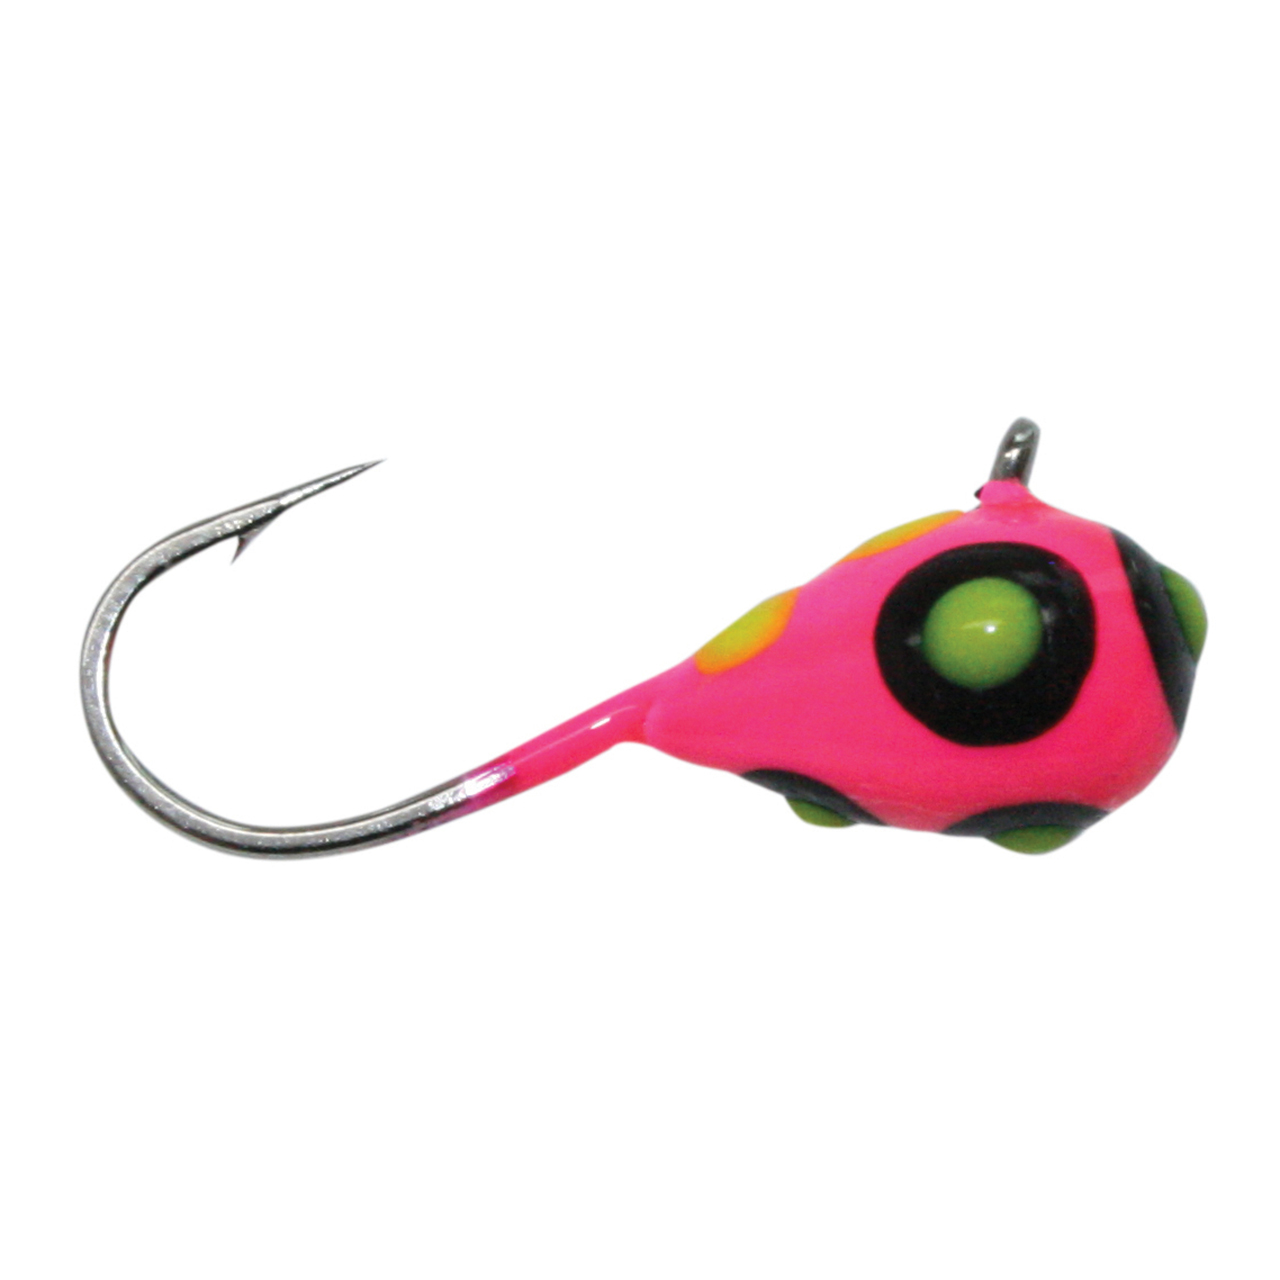 12 NEW SUPER GLOW SPOONS pink JIGS ICE FISHING CRAPPIE for rod red hooks K  & E